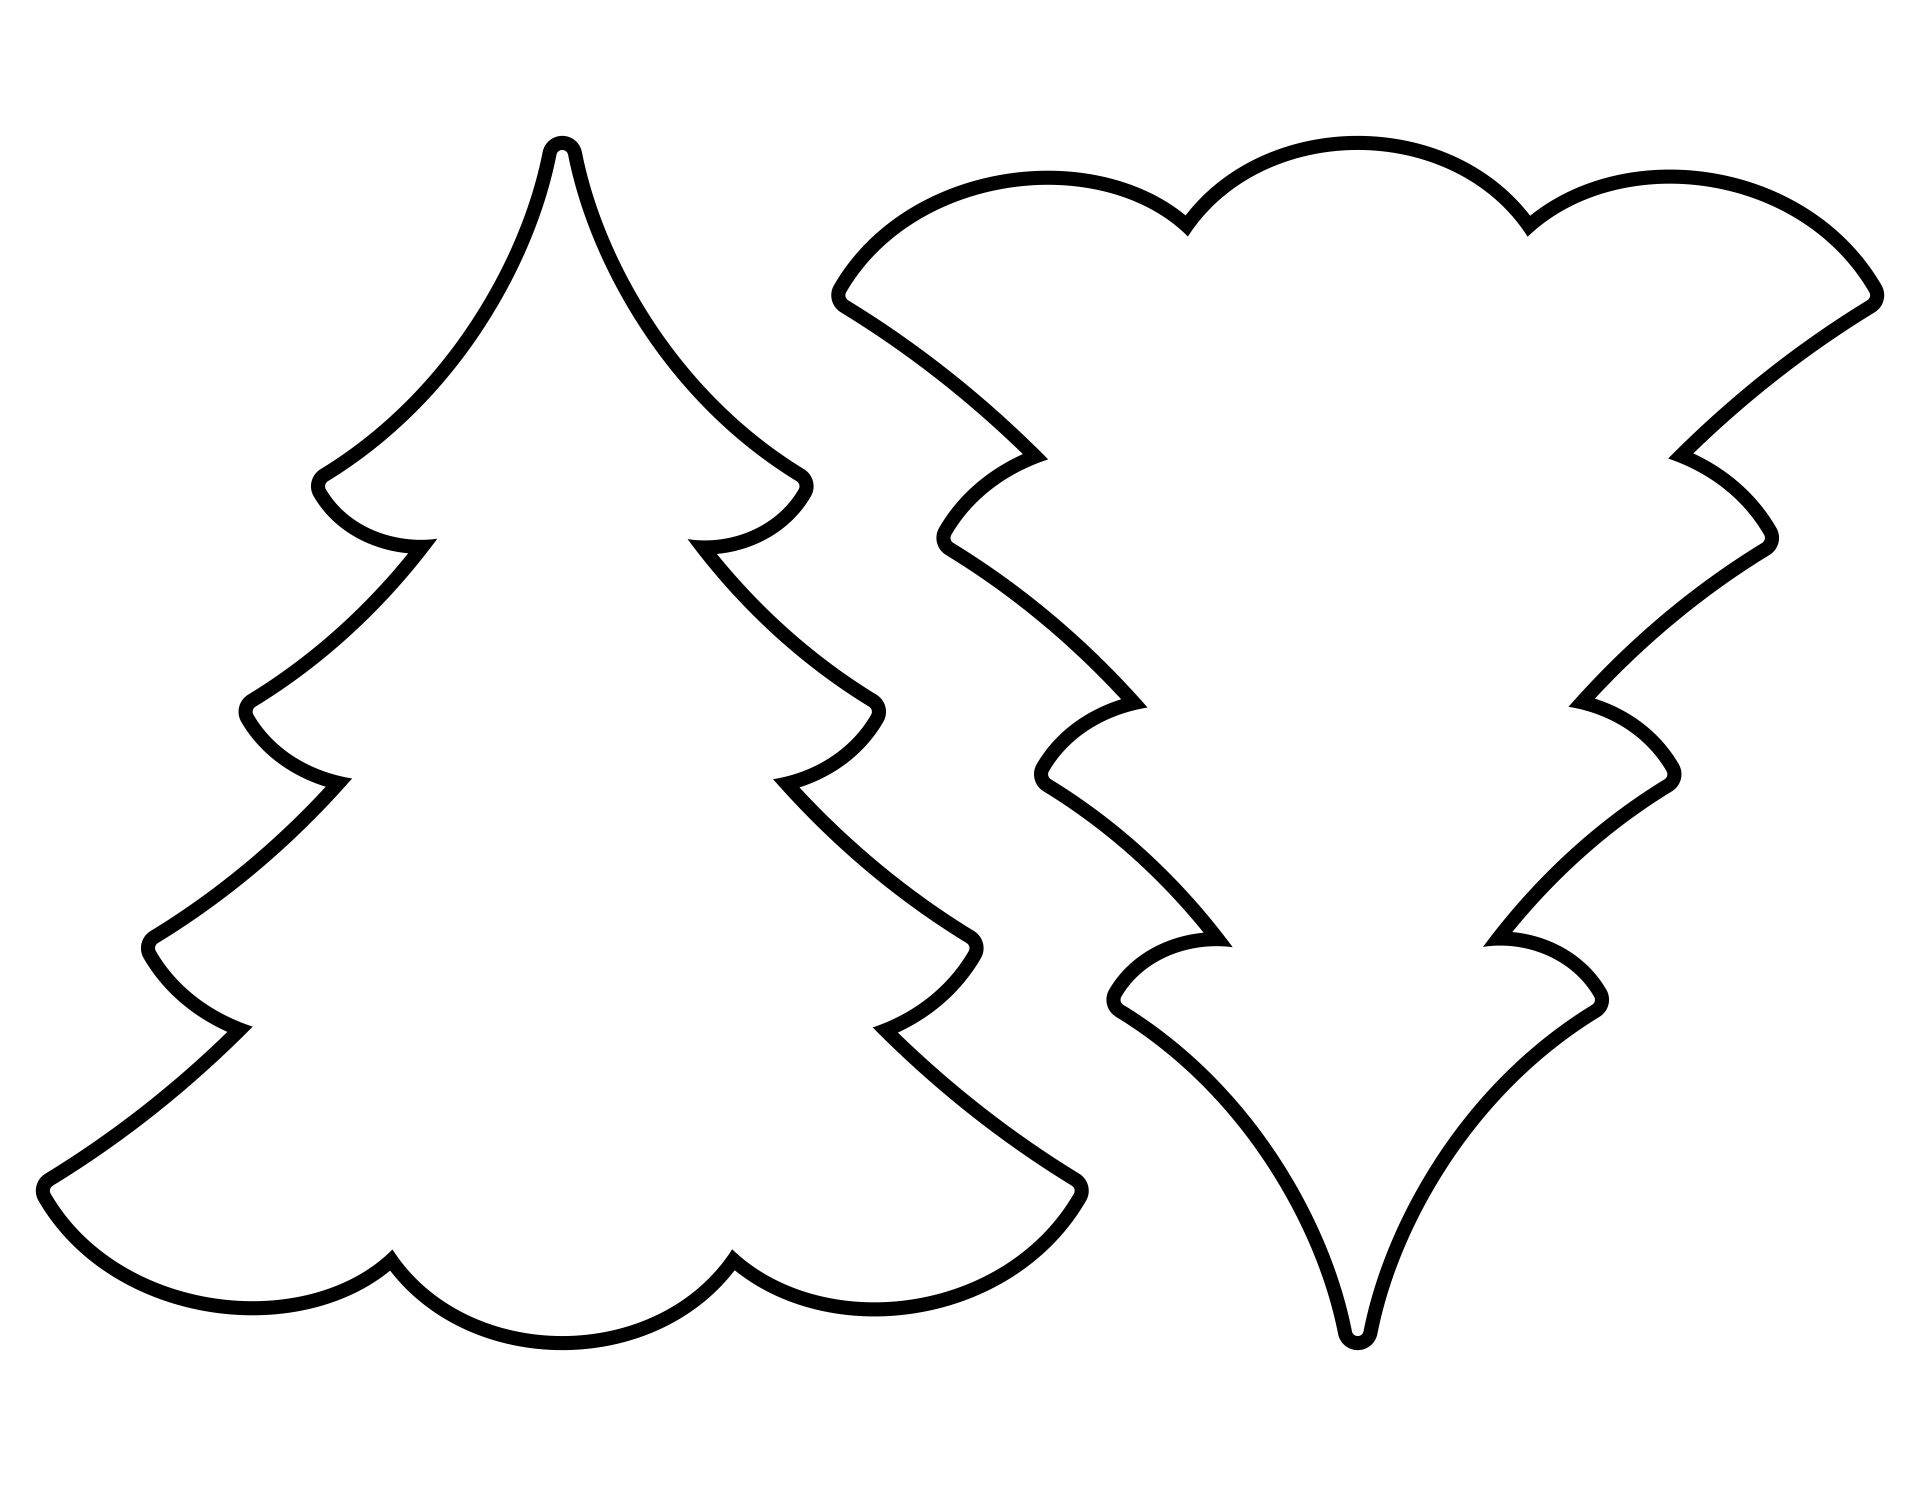 15 Best Large Christmas Tree Printable Templates PDF for Free at Printablee